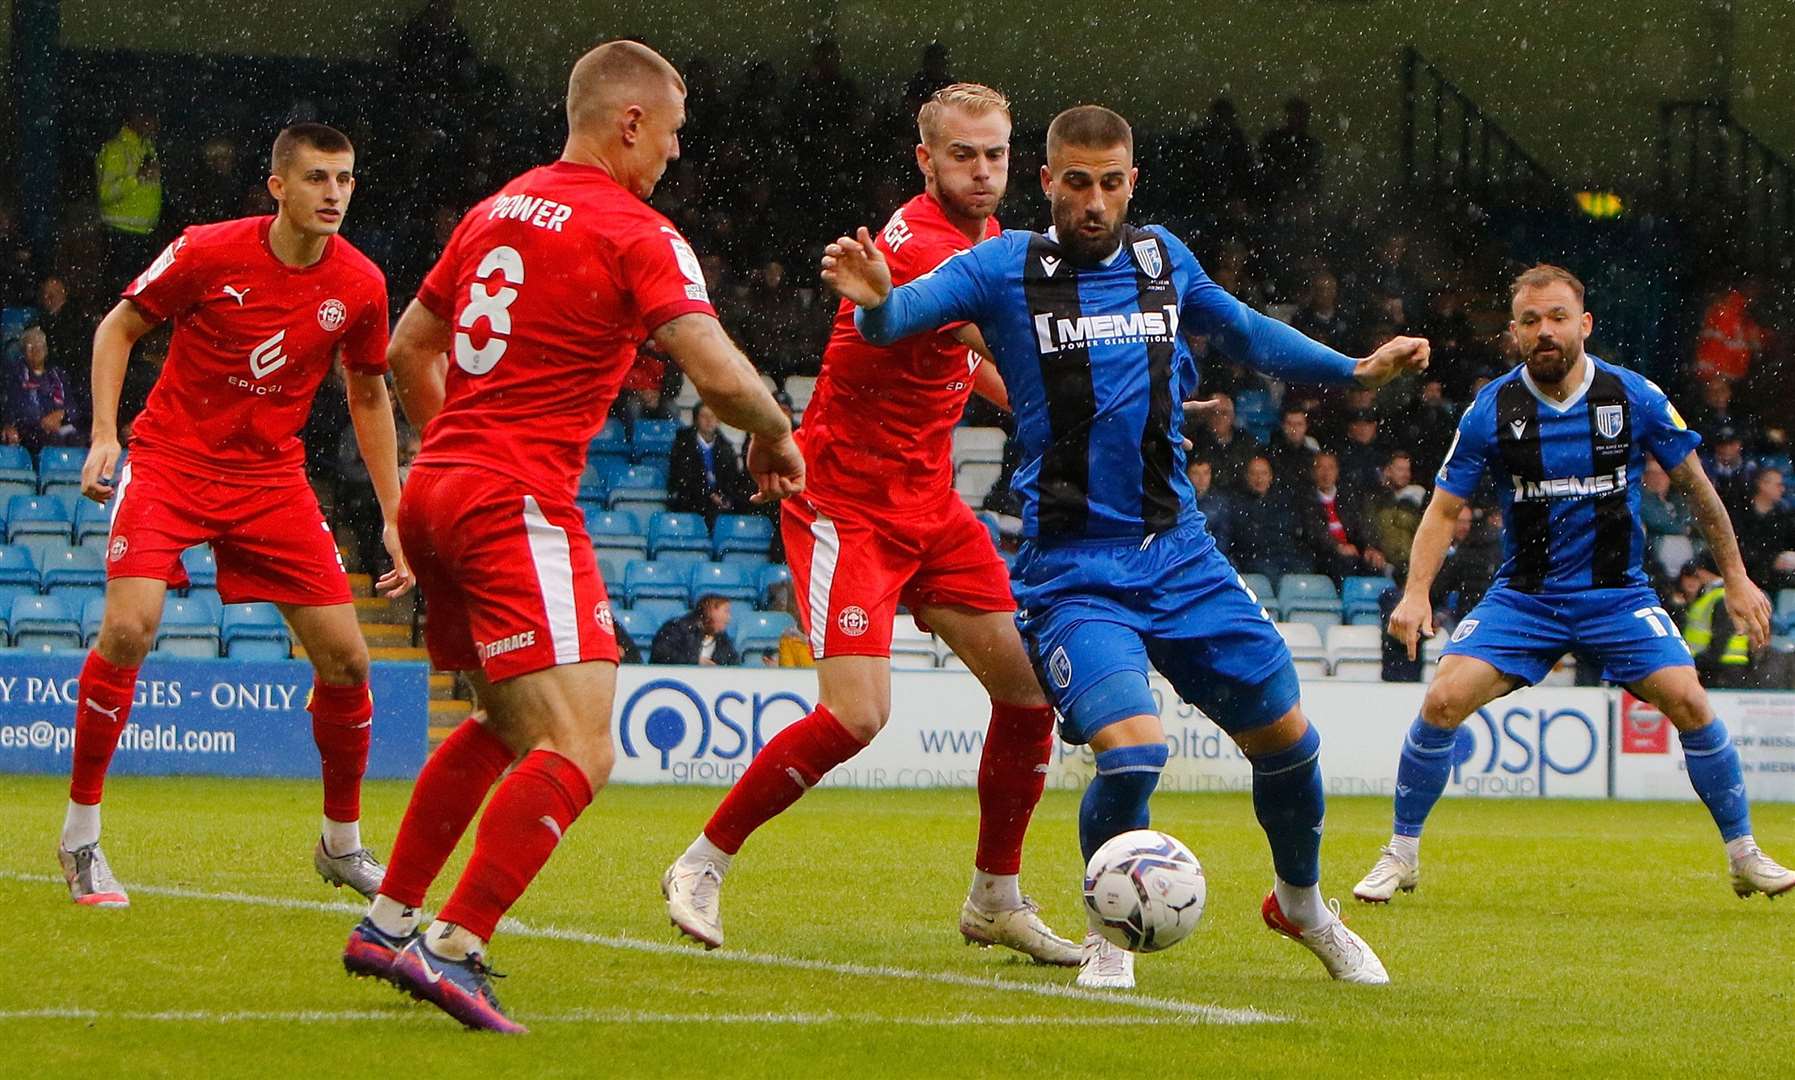 Defender Max Ehmer is outnumbered. Picture: Andy Jones